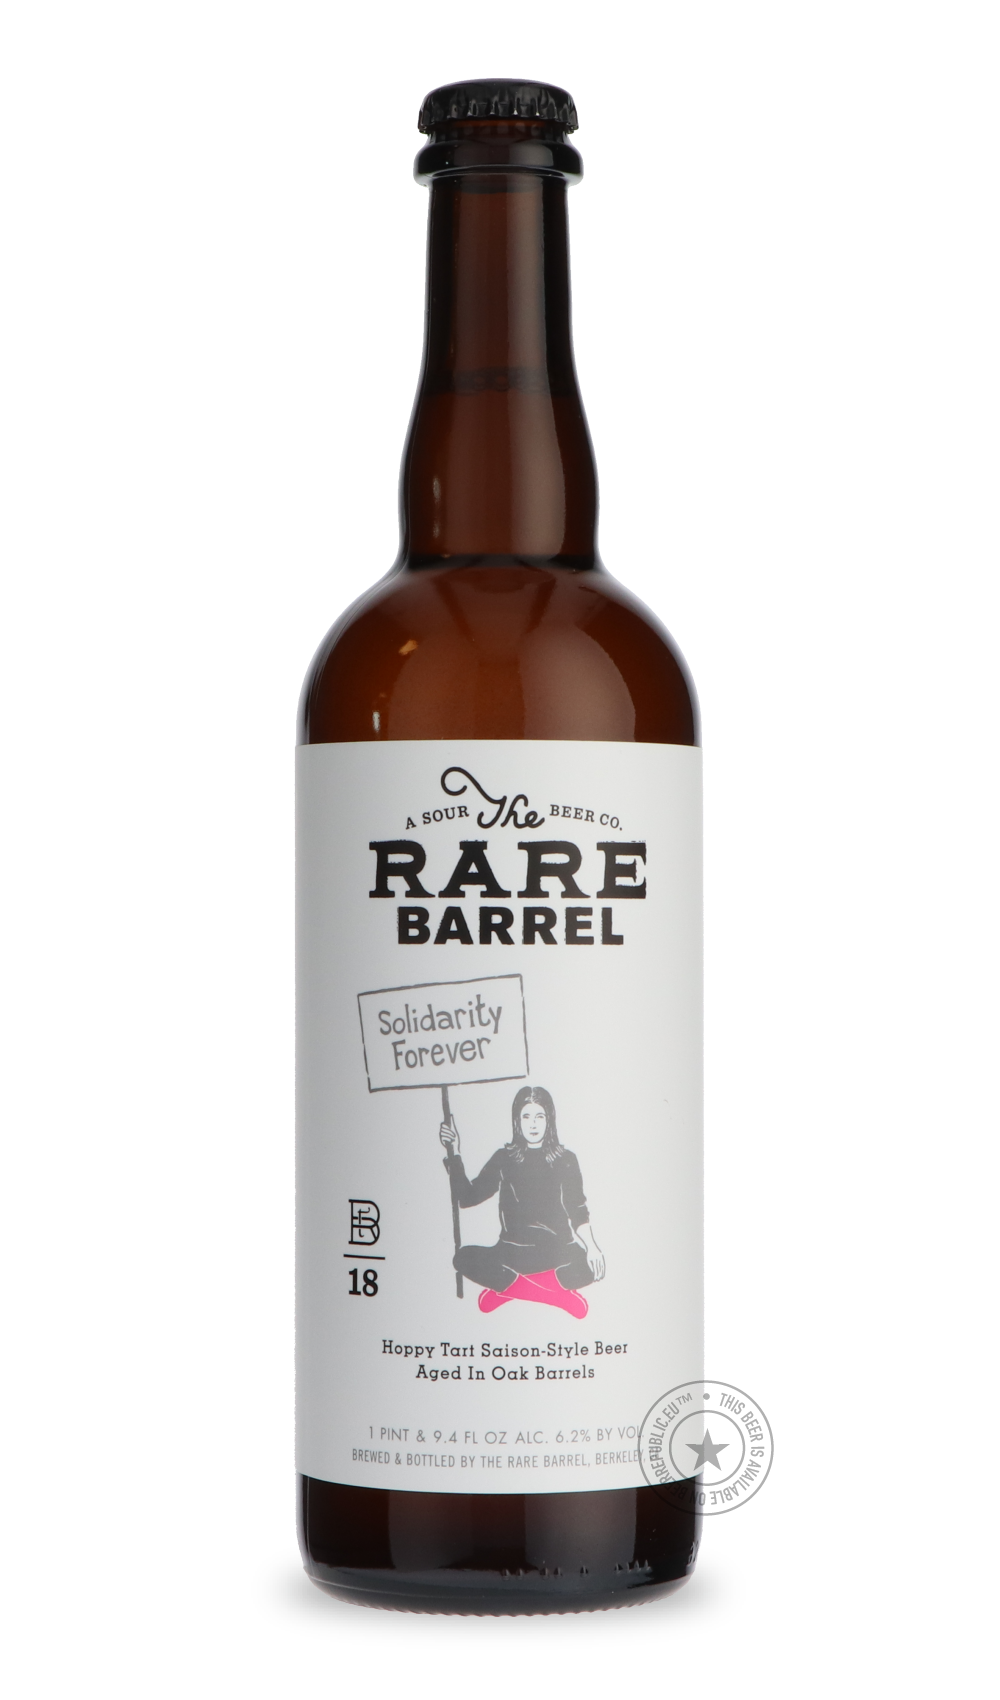 -The Rare Barrel- Solidarity Forever-Sour / Wild & Fruity- Only @ Beer Republic - The best online beer store for American & Canadian craft beer - Buy beer online from the USA and Canada - Bier online kopen - Amerikaans bier kopen - Craft beer store - Craft beer kopen - Amerikanisch bier kaufen - Bier online kaufen - Acheter biere online - IPA - Stout - Porter - New England IPA - Hazy IPA - Imperial Stout - Barrel Aged - Barrel Aged Imperial Stout - Brown - Dark beer - Blond - Blonde - Pilsner - Lager - Whea